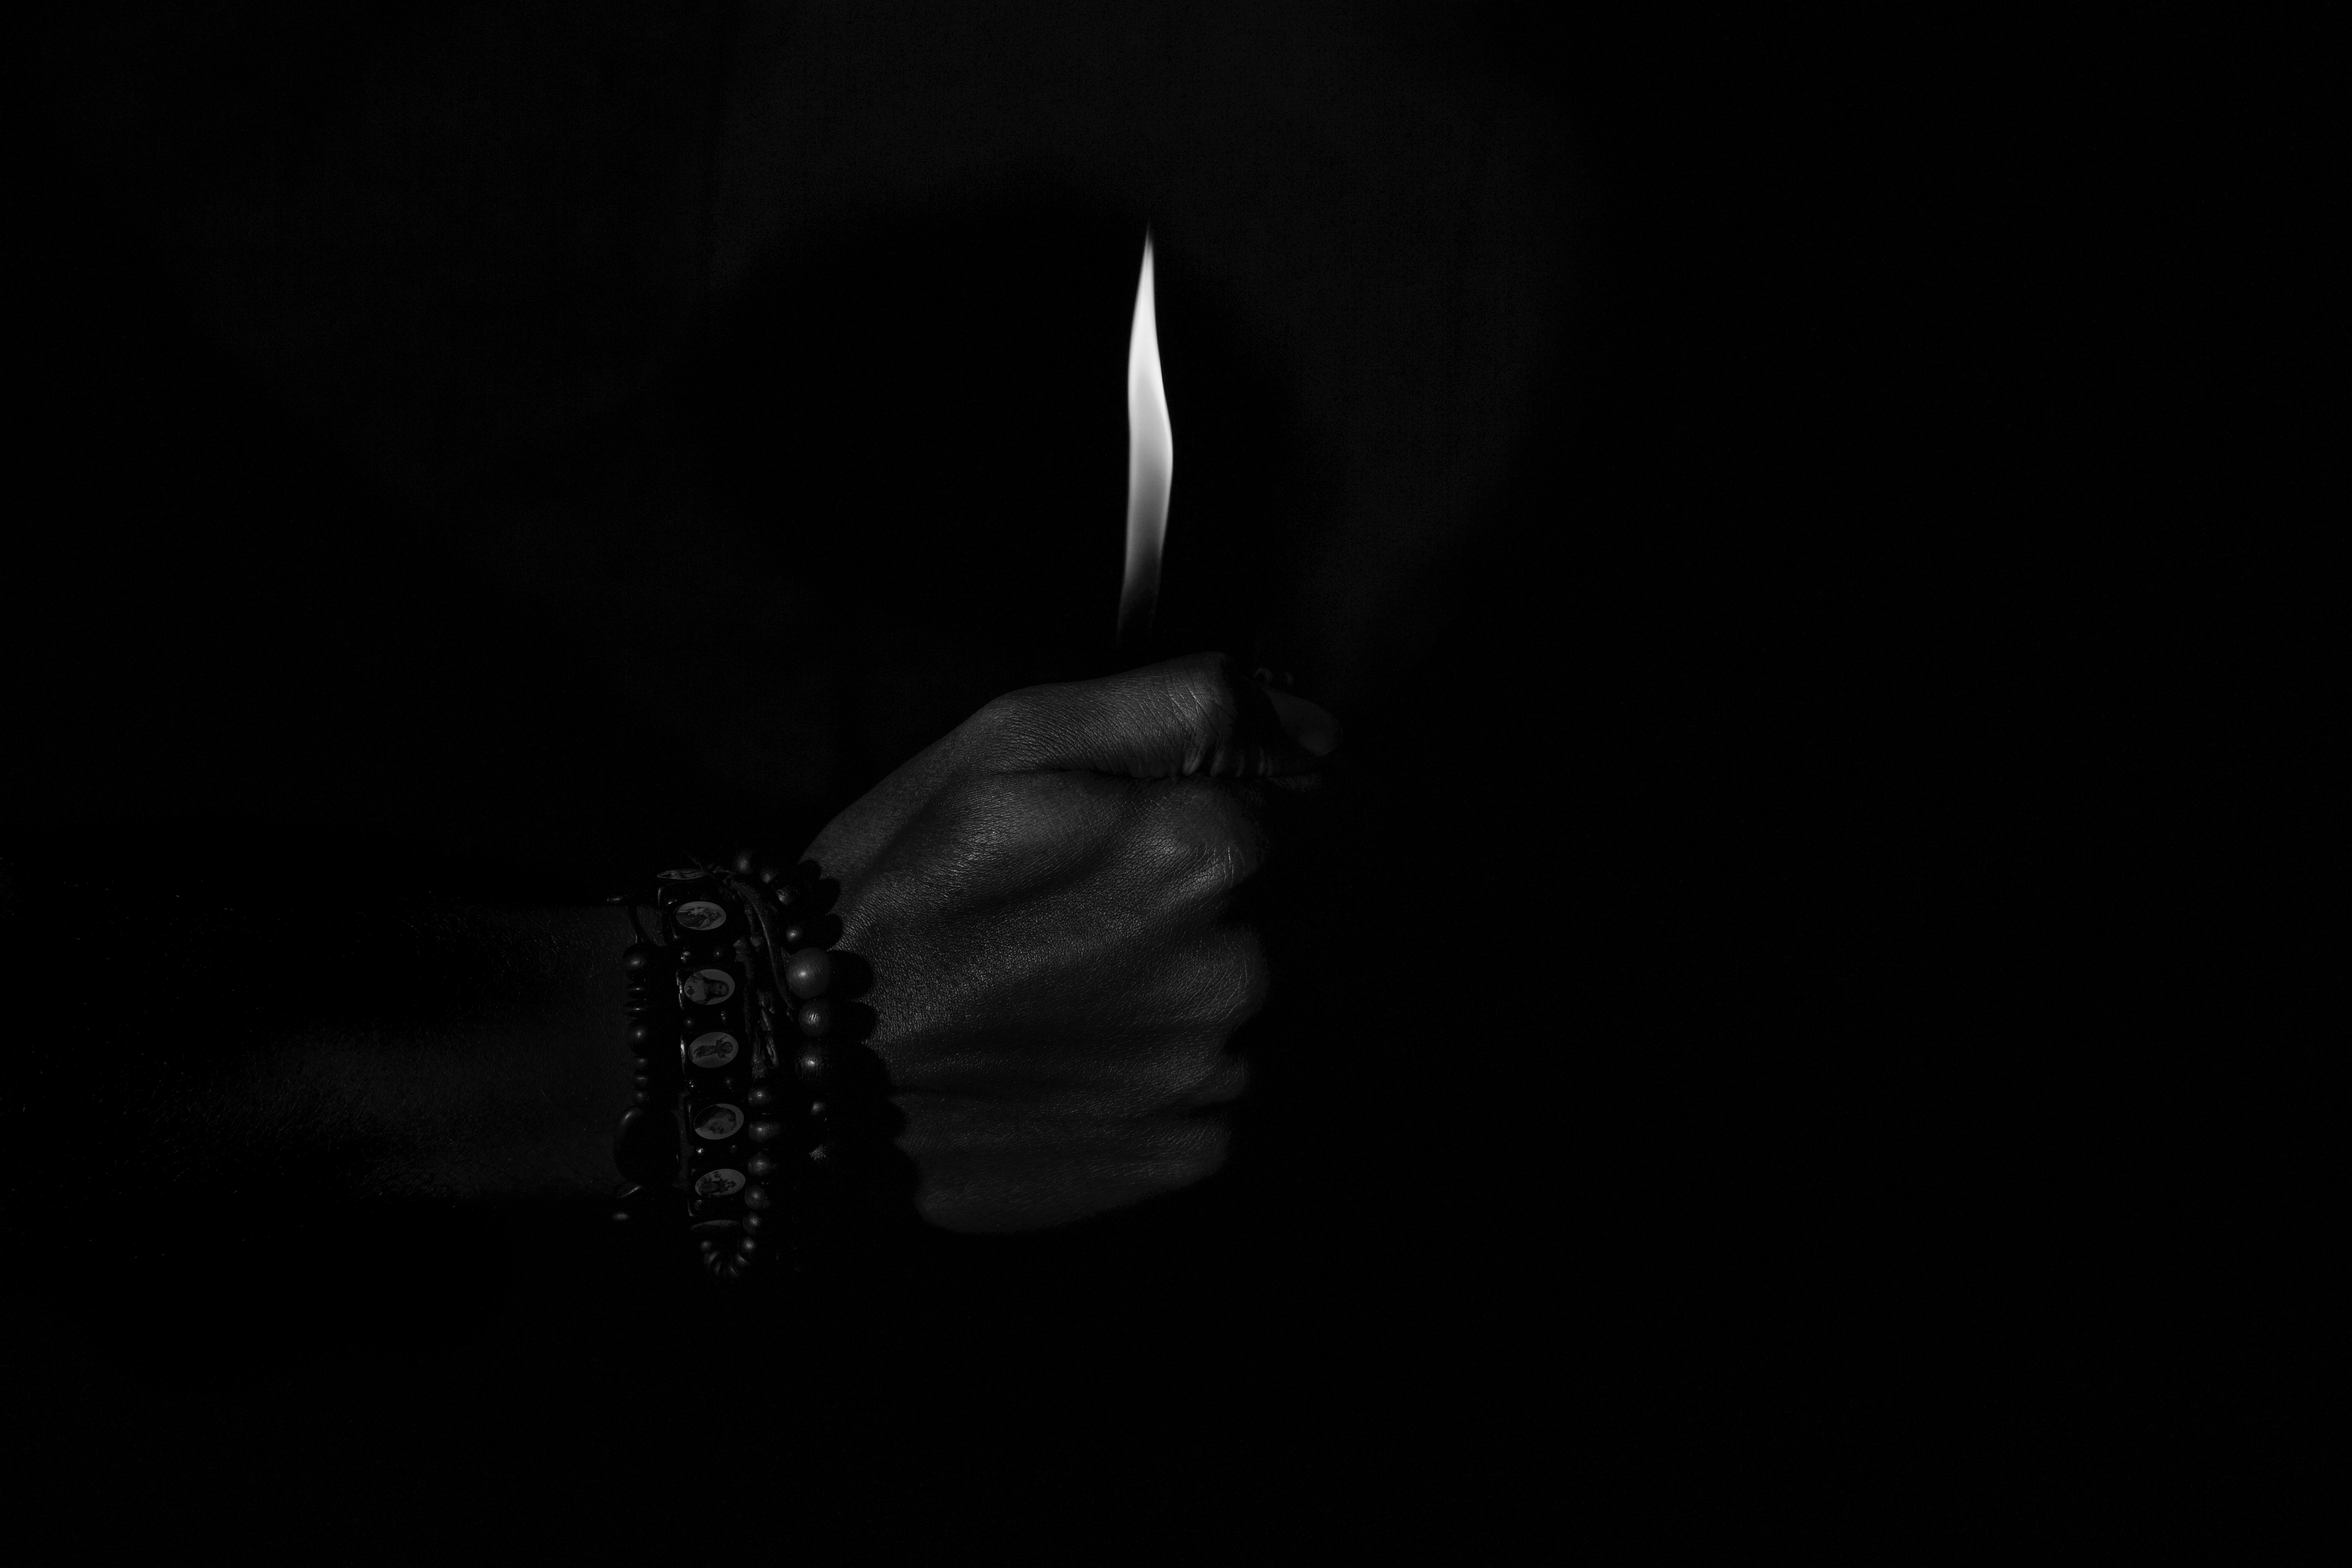 hands, chb, black, bw, candle phone background